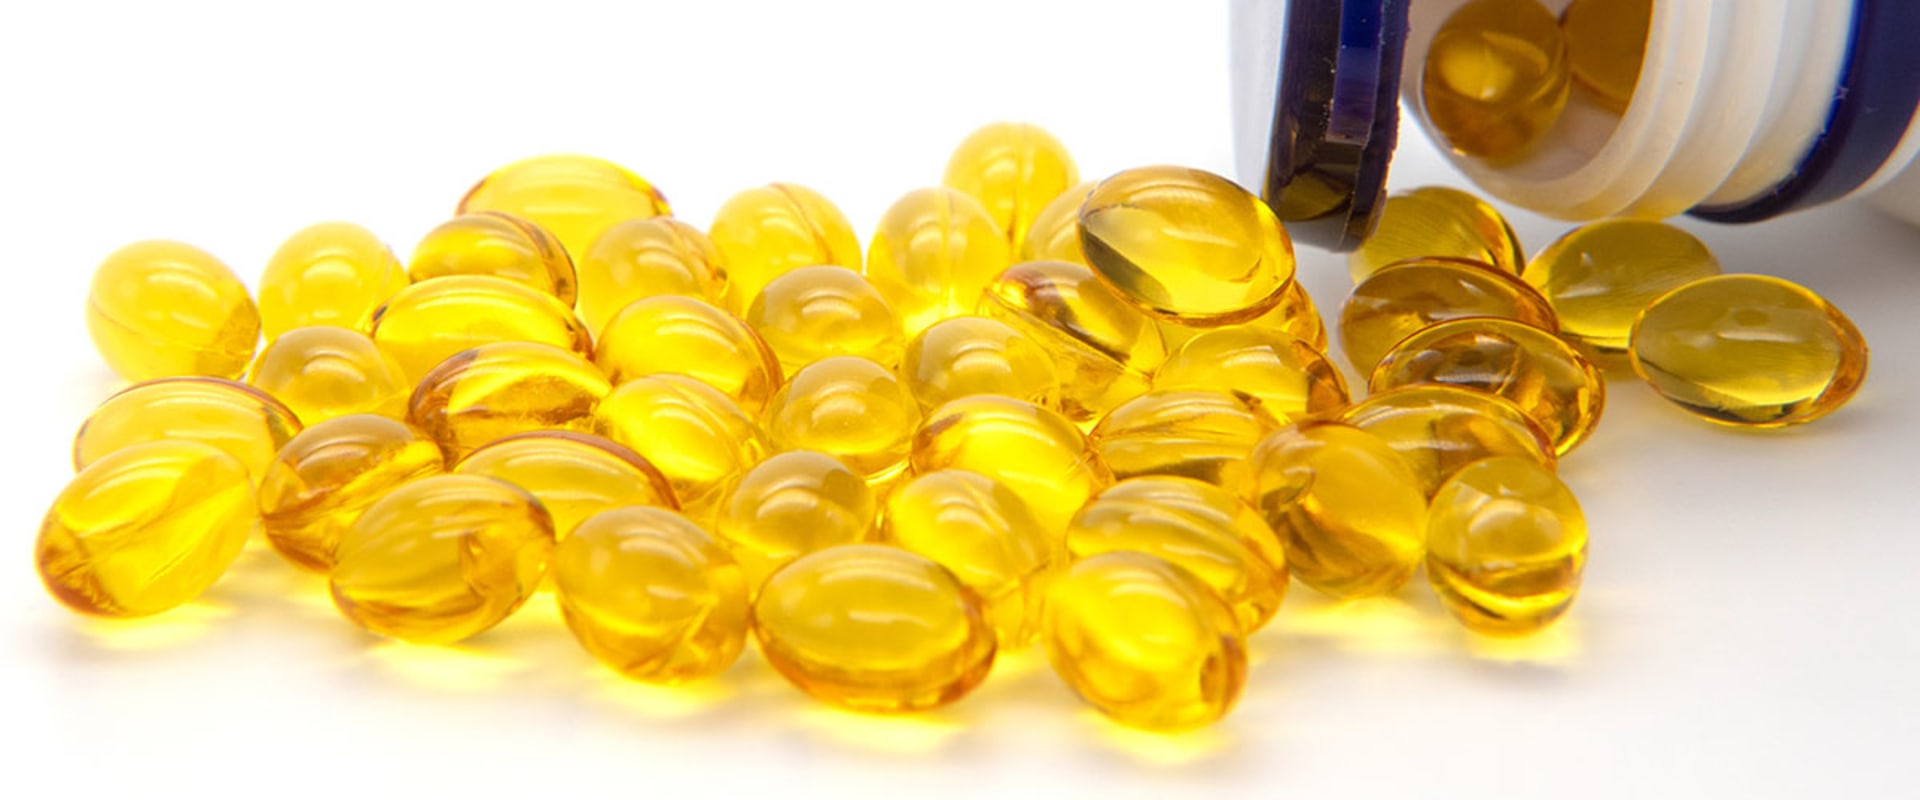 Do I Need to Take an Additional Vitamin D Supplement for Healthy Aging?